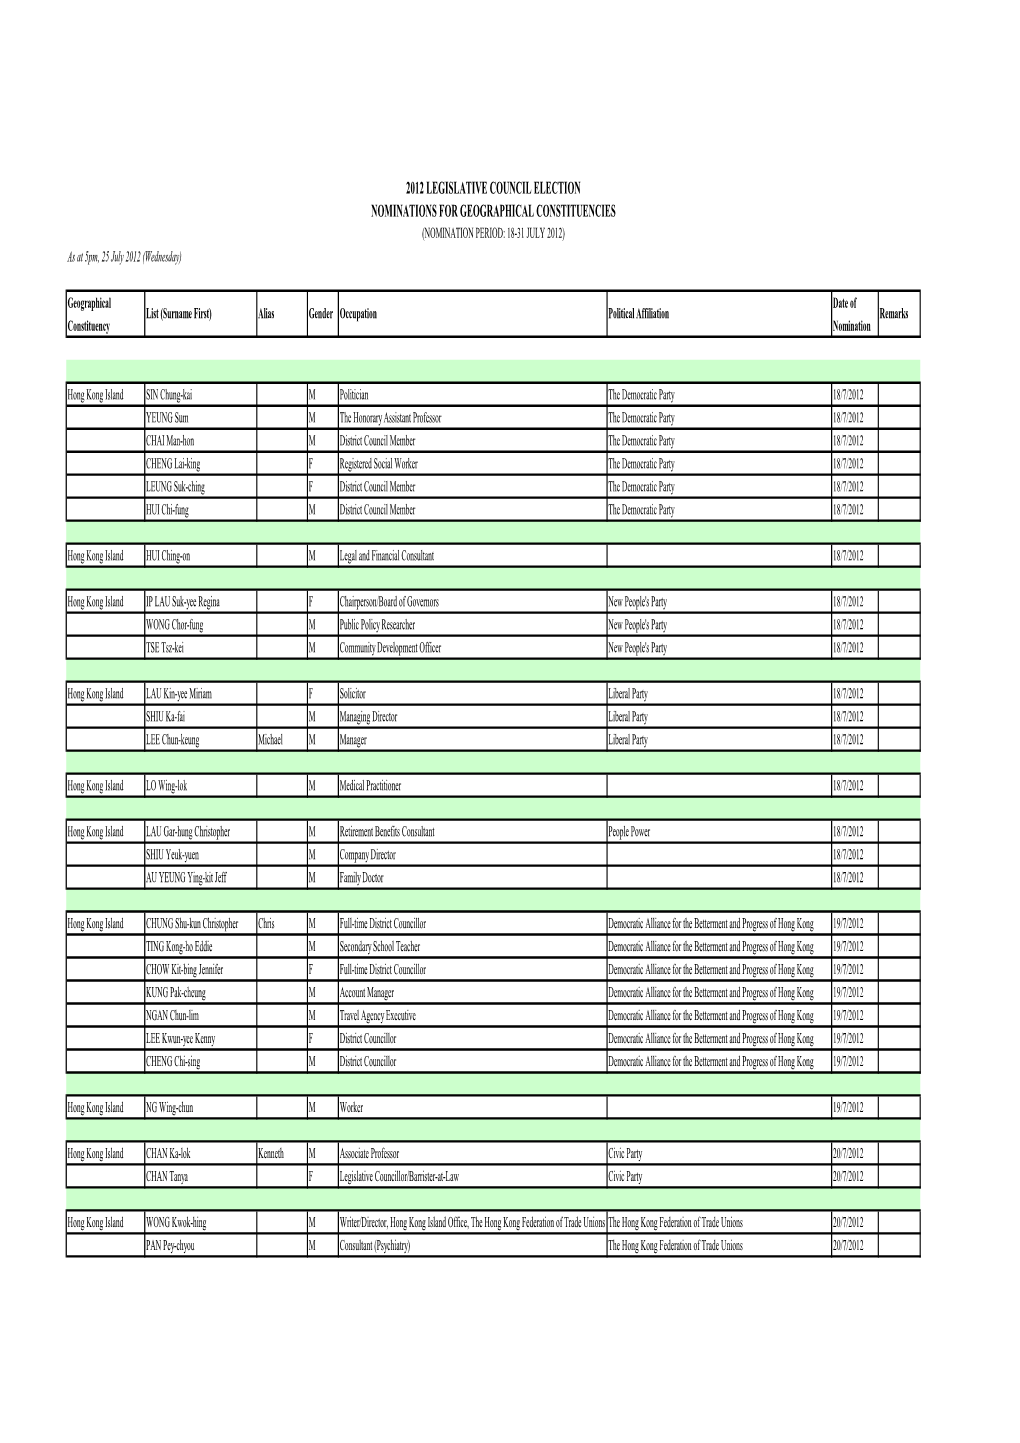 2012 LEGISLATIVE COUNCIL ELECTION NOMINATIONS for GEOGRAPHICAL CONSTITUENCIES (NOMINATION PERIOD: 18-31 JULY 2012) As at 5Pm, 25 July 2012 (Wednesday)